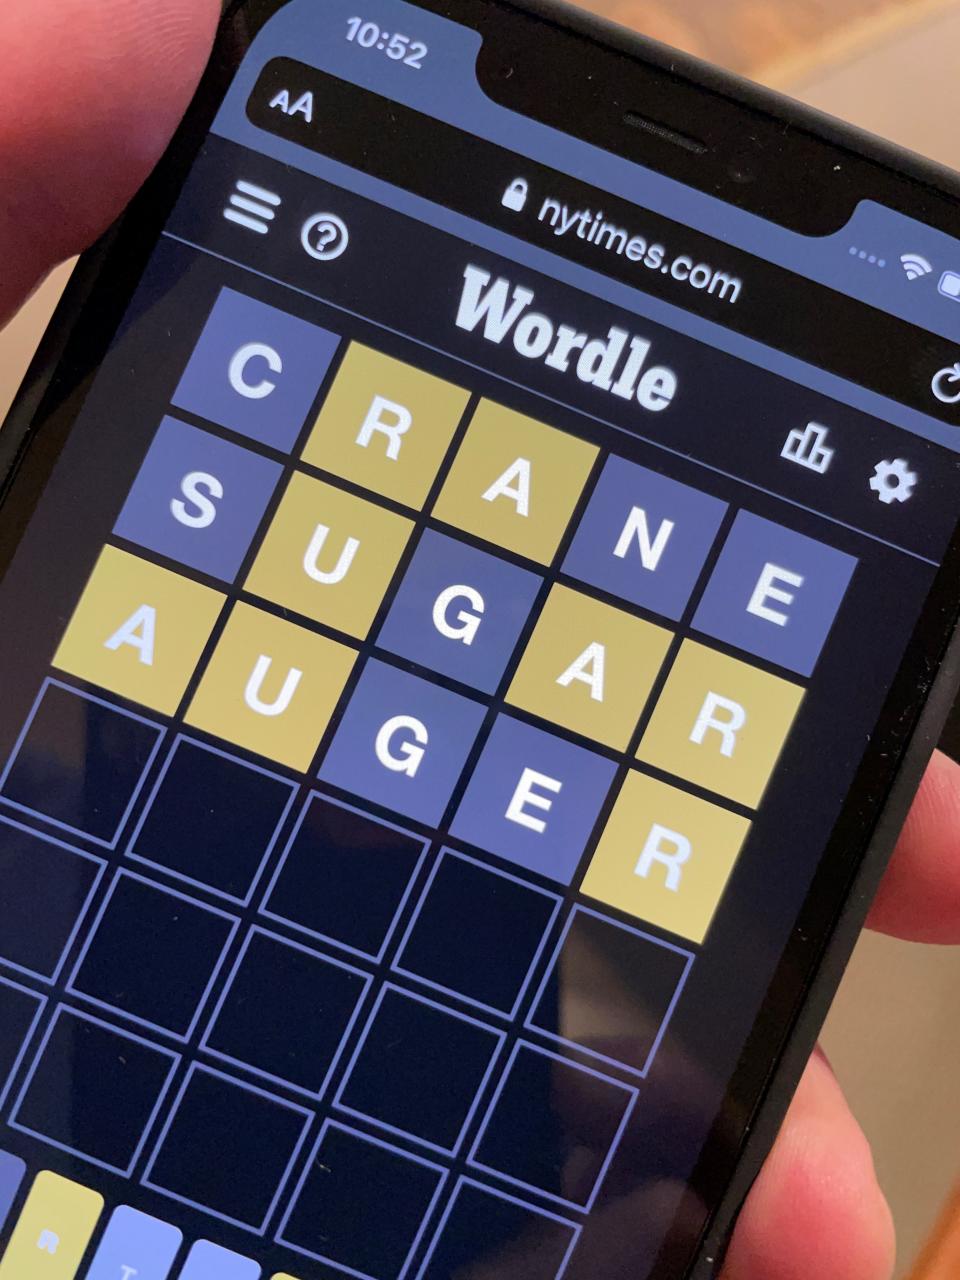 A picture of the word game Wordle on a smartphone.